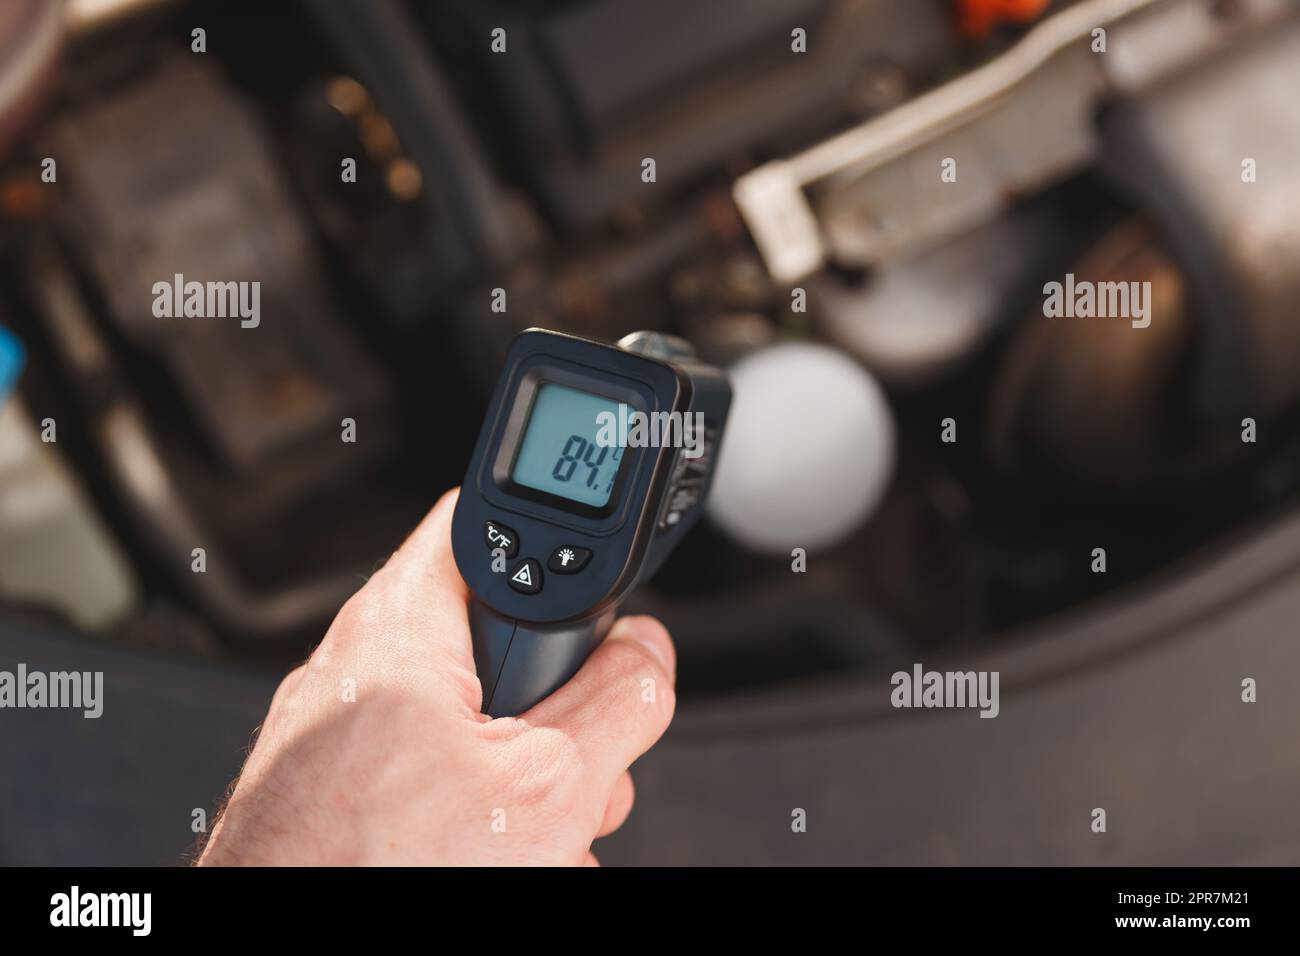 https://c8.alamy.com/comp/2PR7M21/measuring-temperature-of-internal-combustion-engine-turbine-by-laser-infrared-thermometer-2PR7M21.jpg